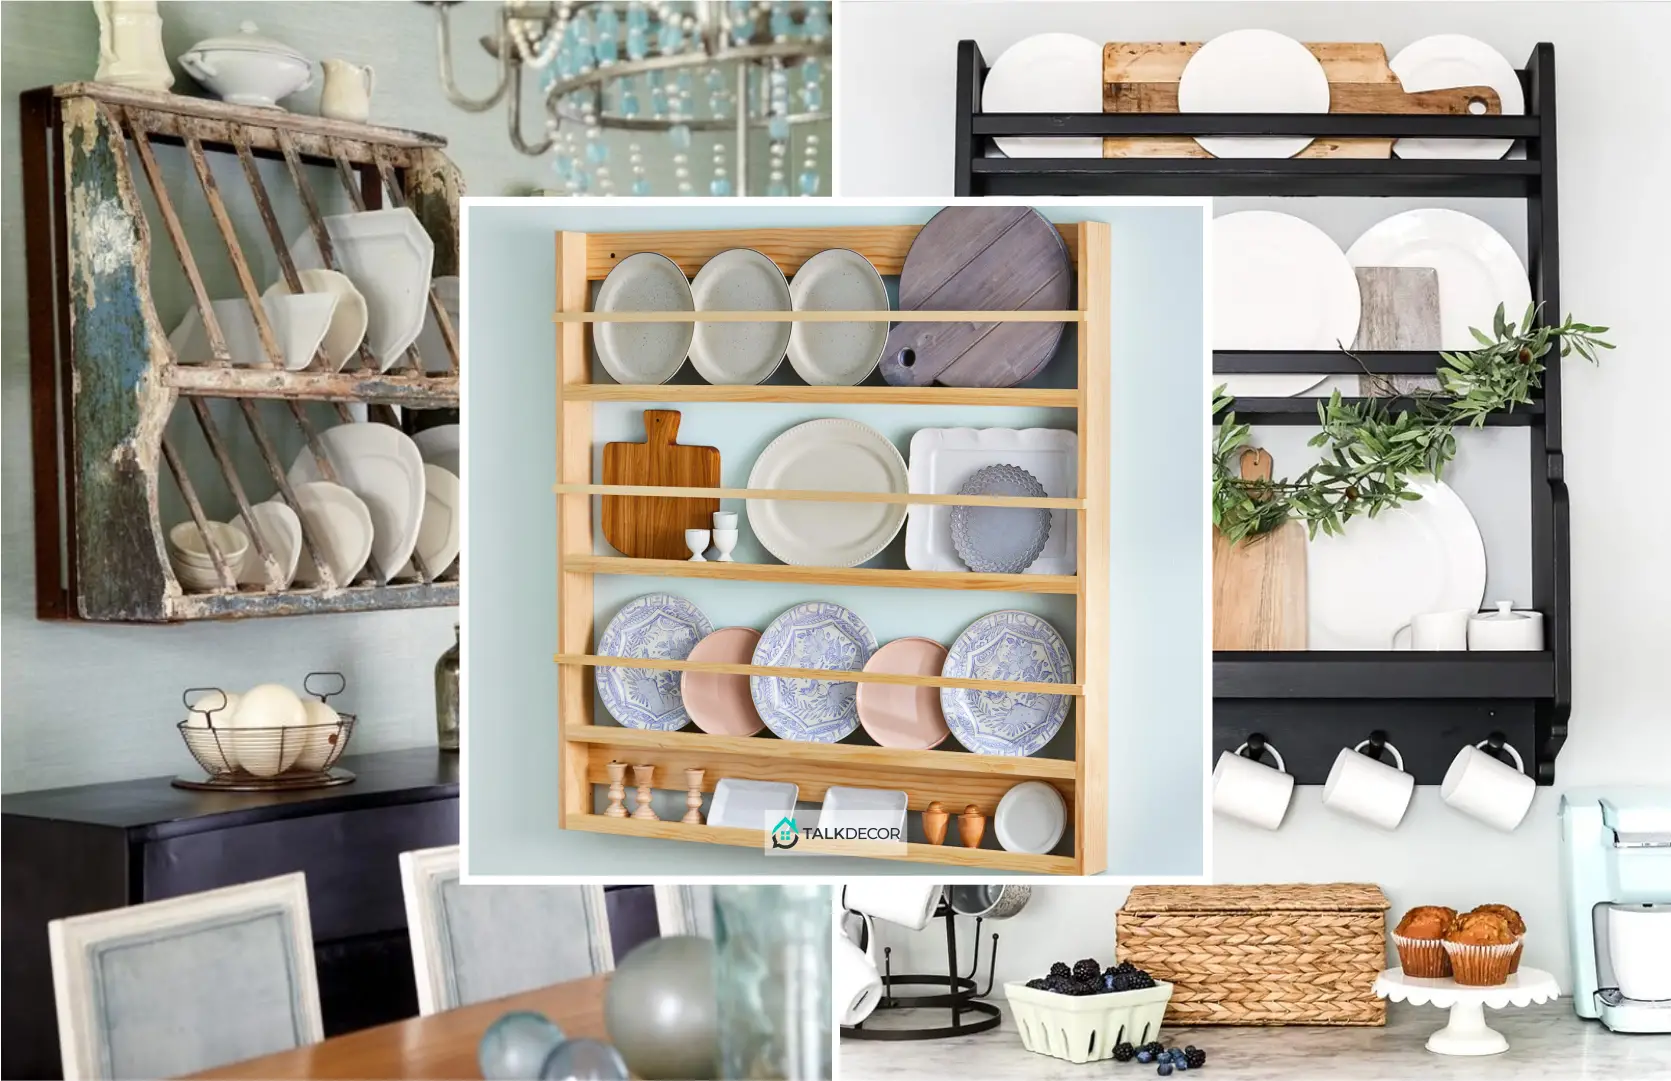 How to Make Your Own Plate Rack